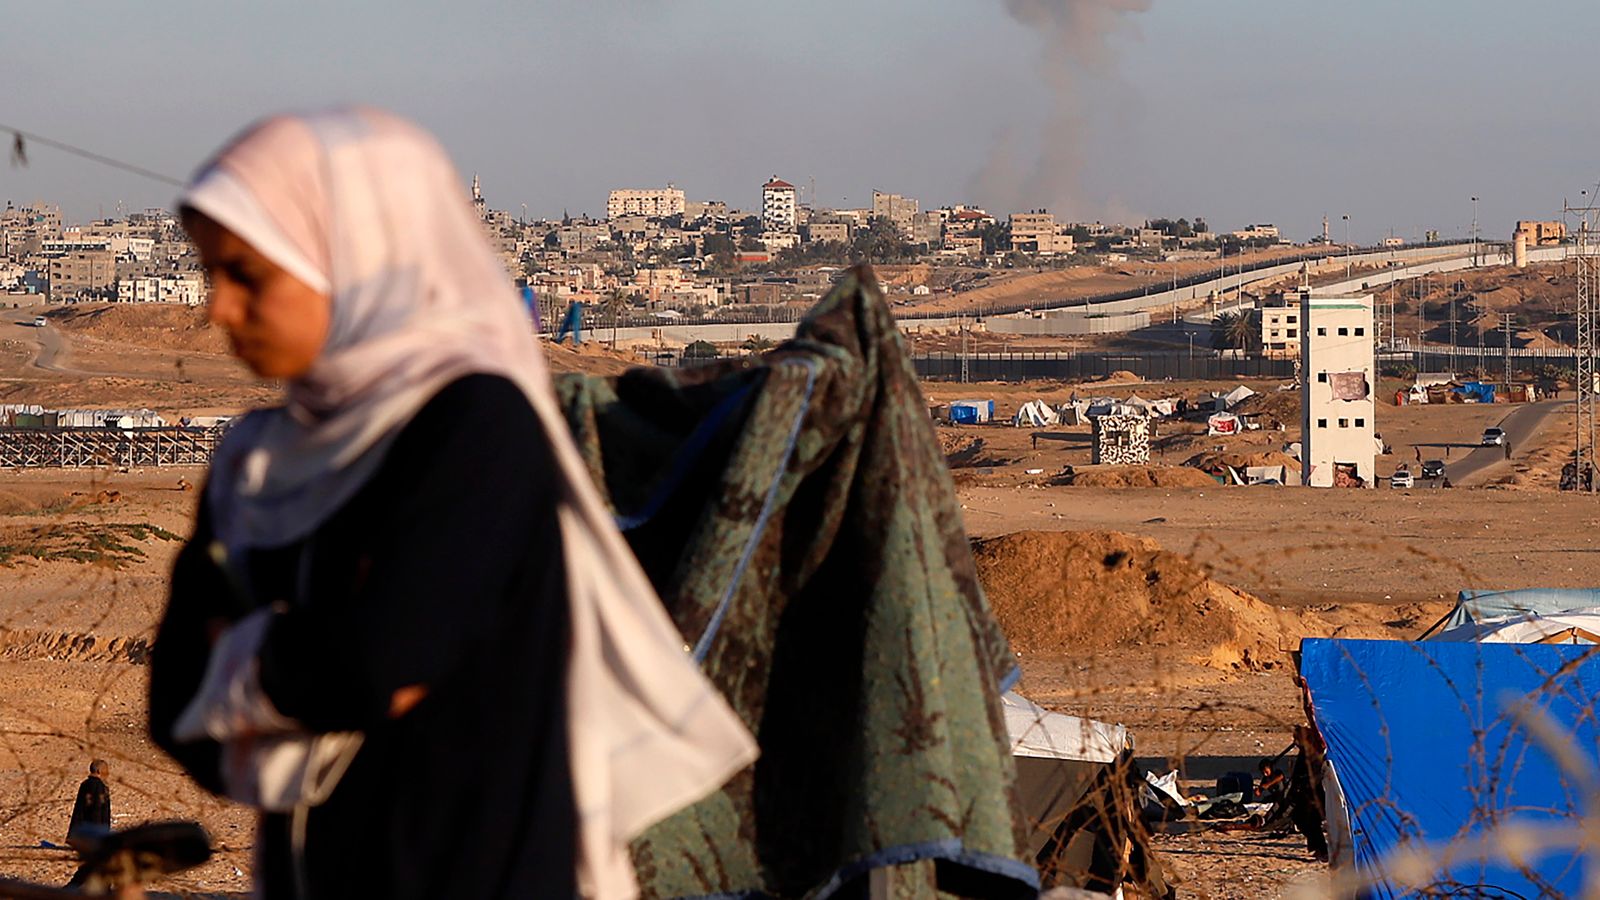 embattled netanyahu's choice: accept ceasefire deal or gamble on rafah incursion